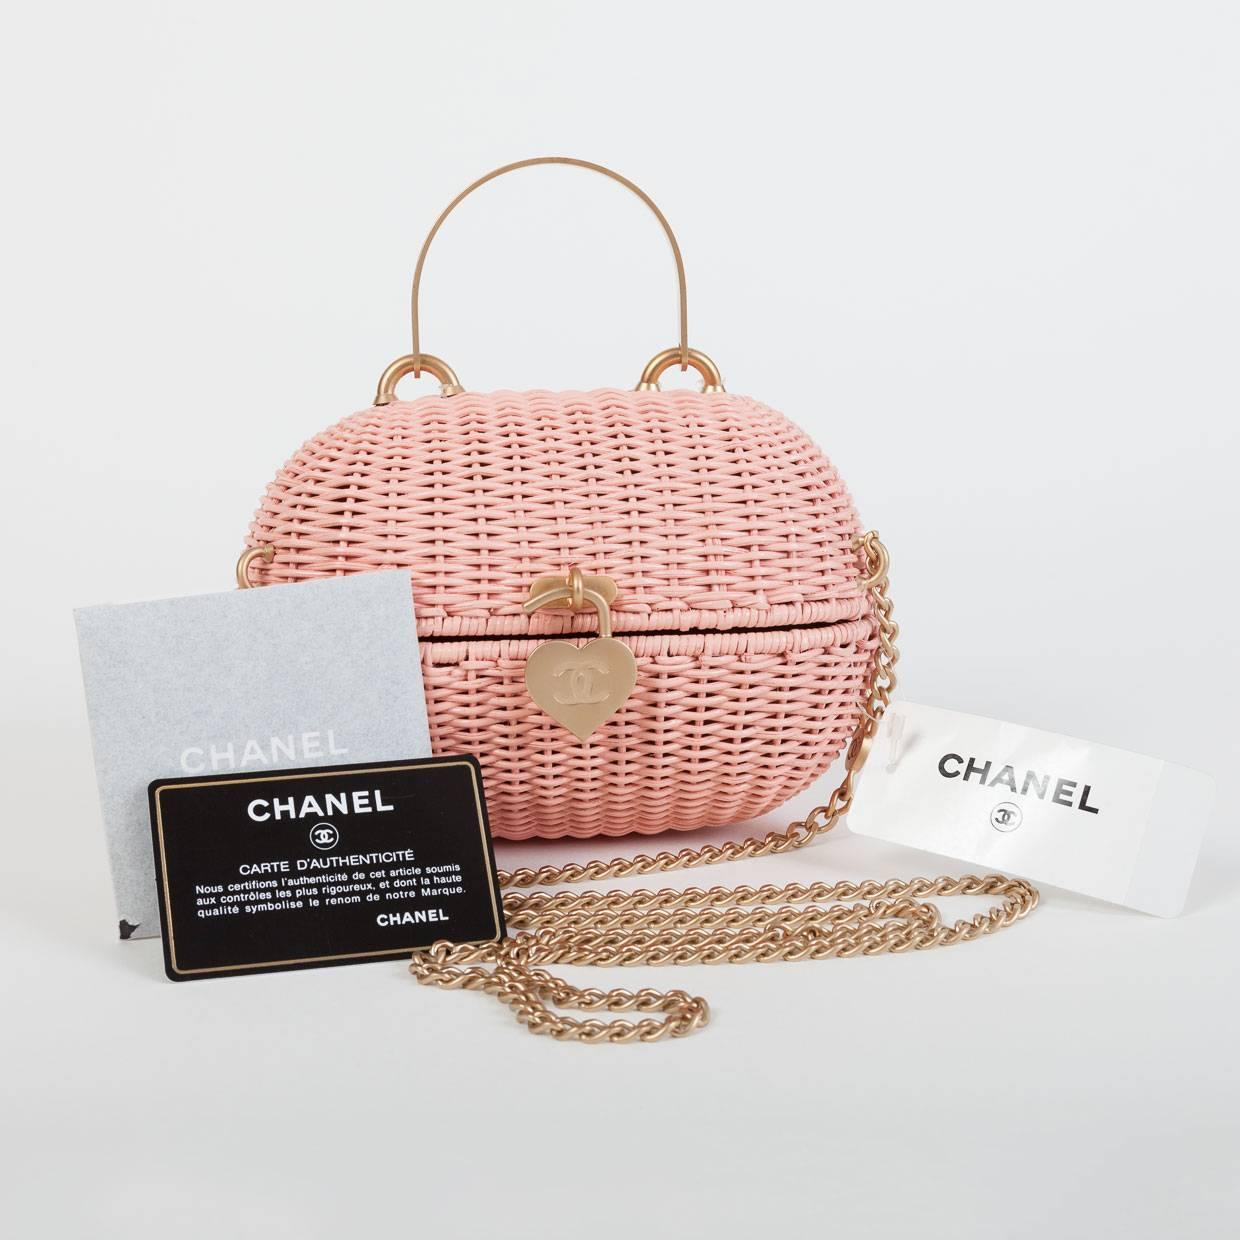 Founded in 1909 by French designer Gabrielle “Coco” Chanel, the House of Chanel transcends time with its iconic design & avant-garde Parisian style. Coco said, 